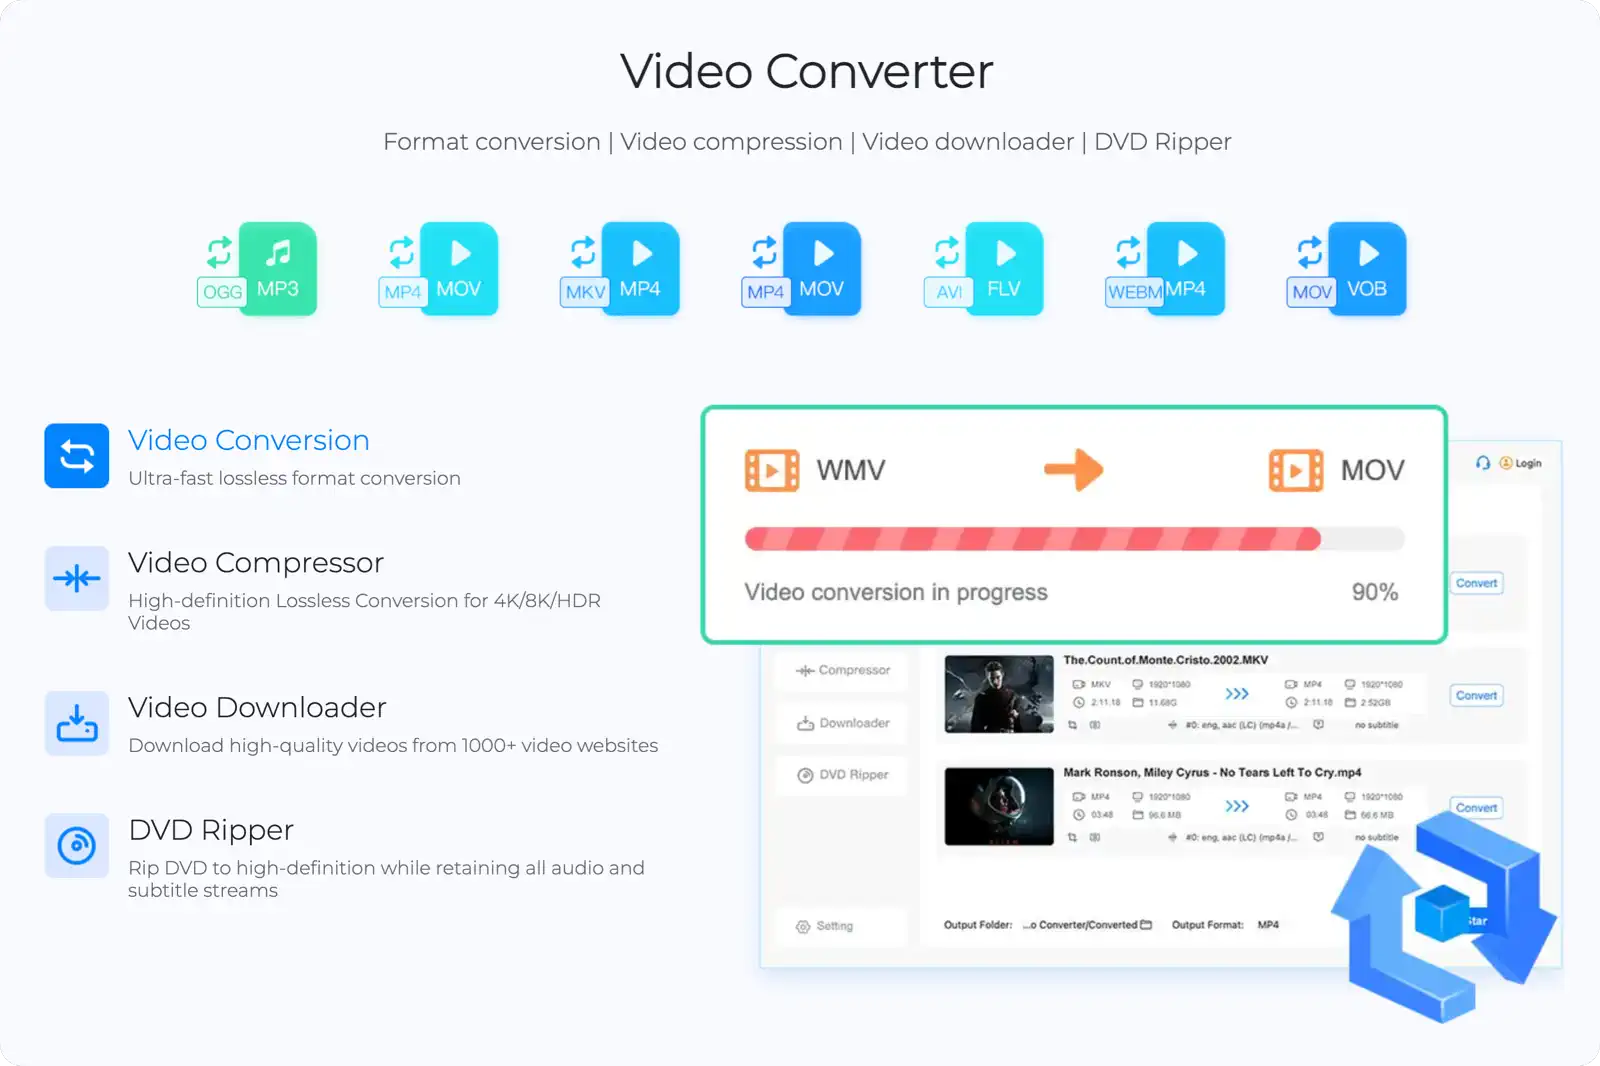 Revolutionize Your Video Editing with Siovue Video Converter